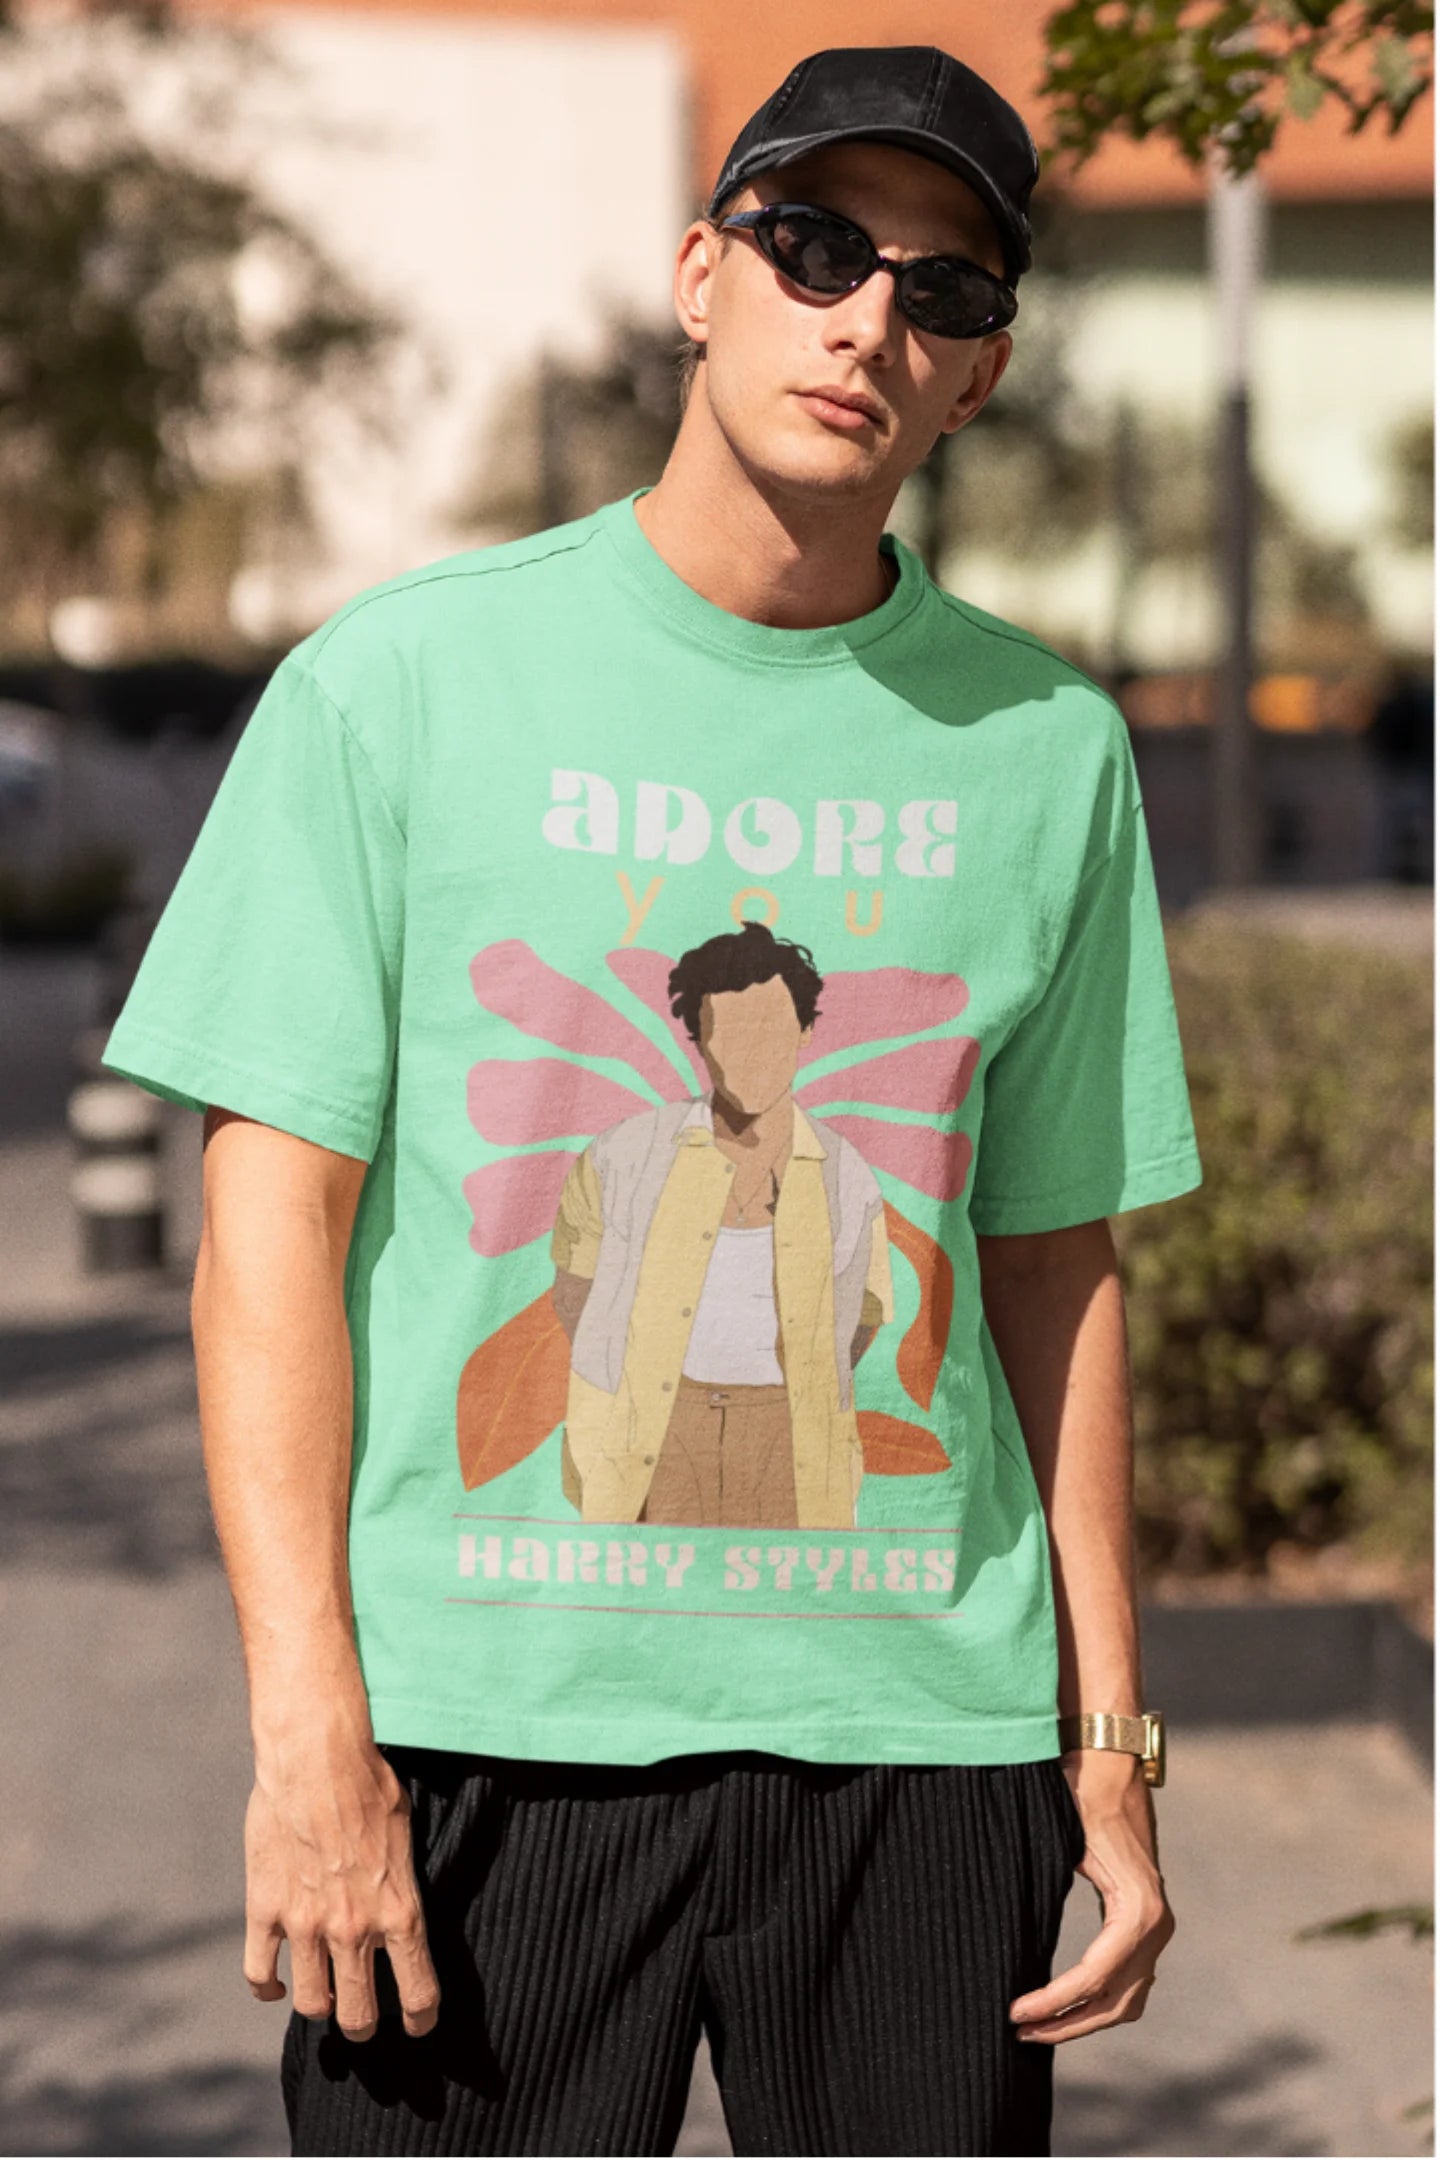 Second image of man wearing mint green oversized t-shirt featuring 'Adore You' inspired design - ideal for fans of Harry Styles and One Direction